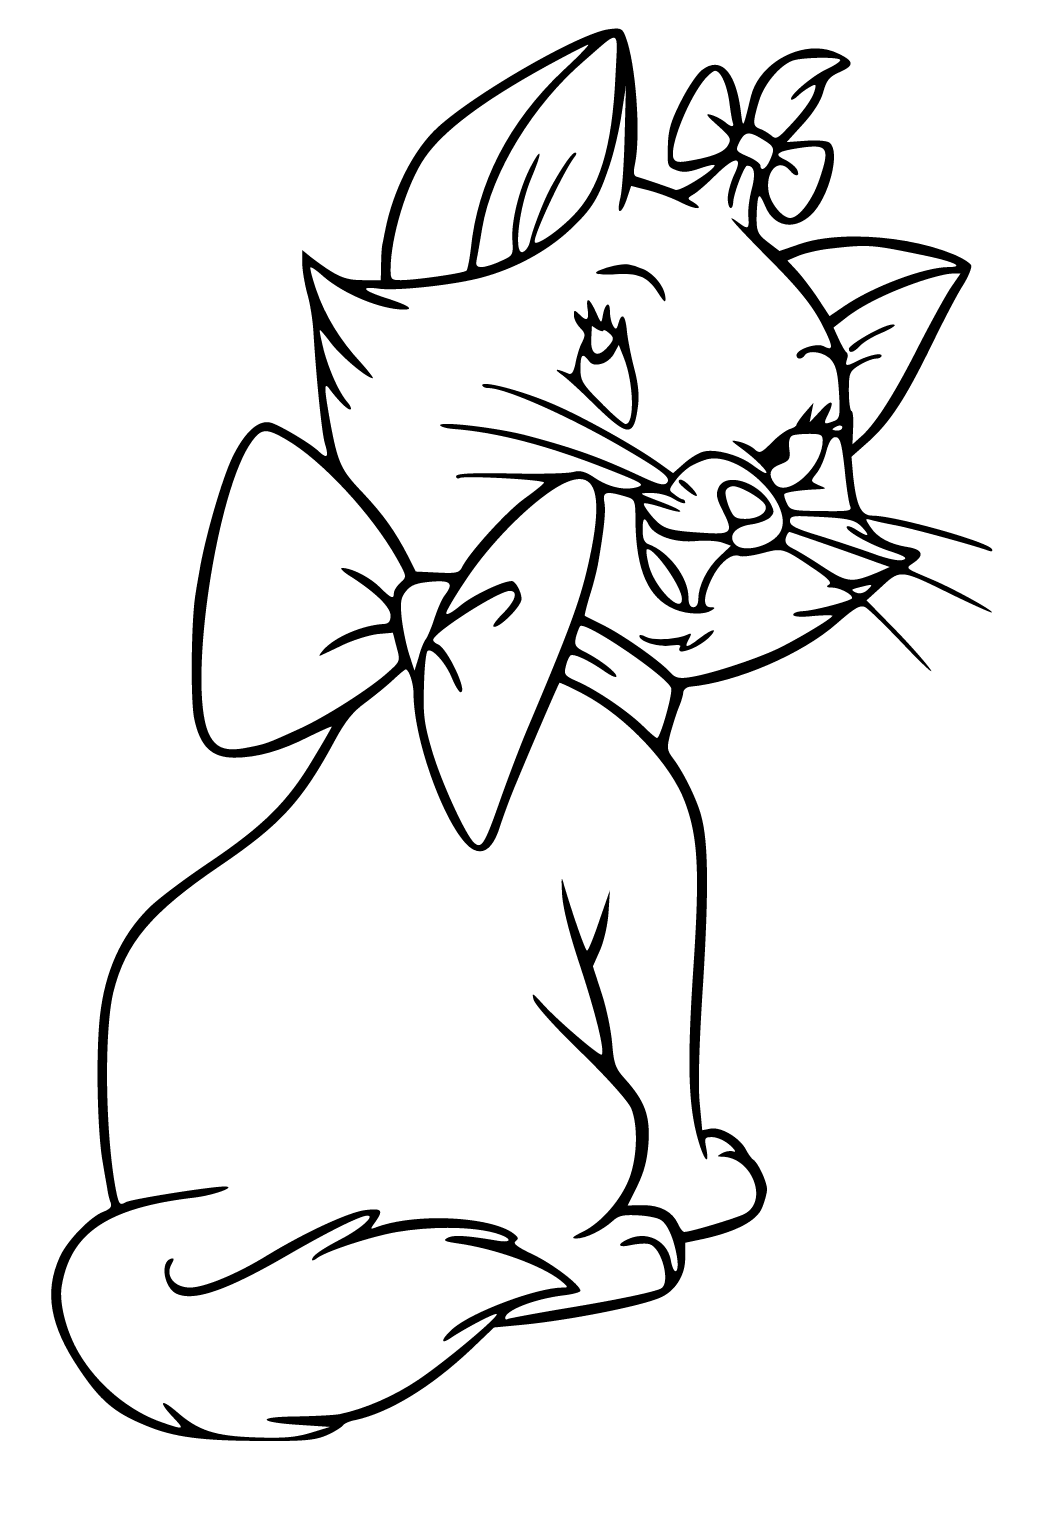 Free printable aristocats decoration coloring page for adults and kids